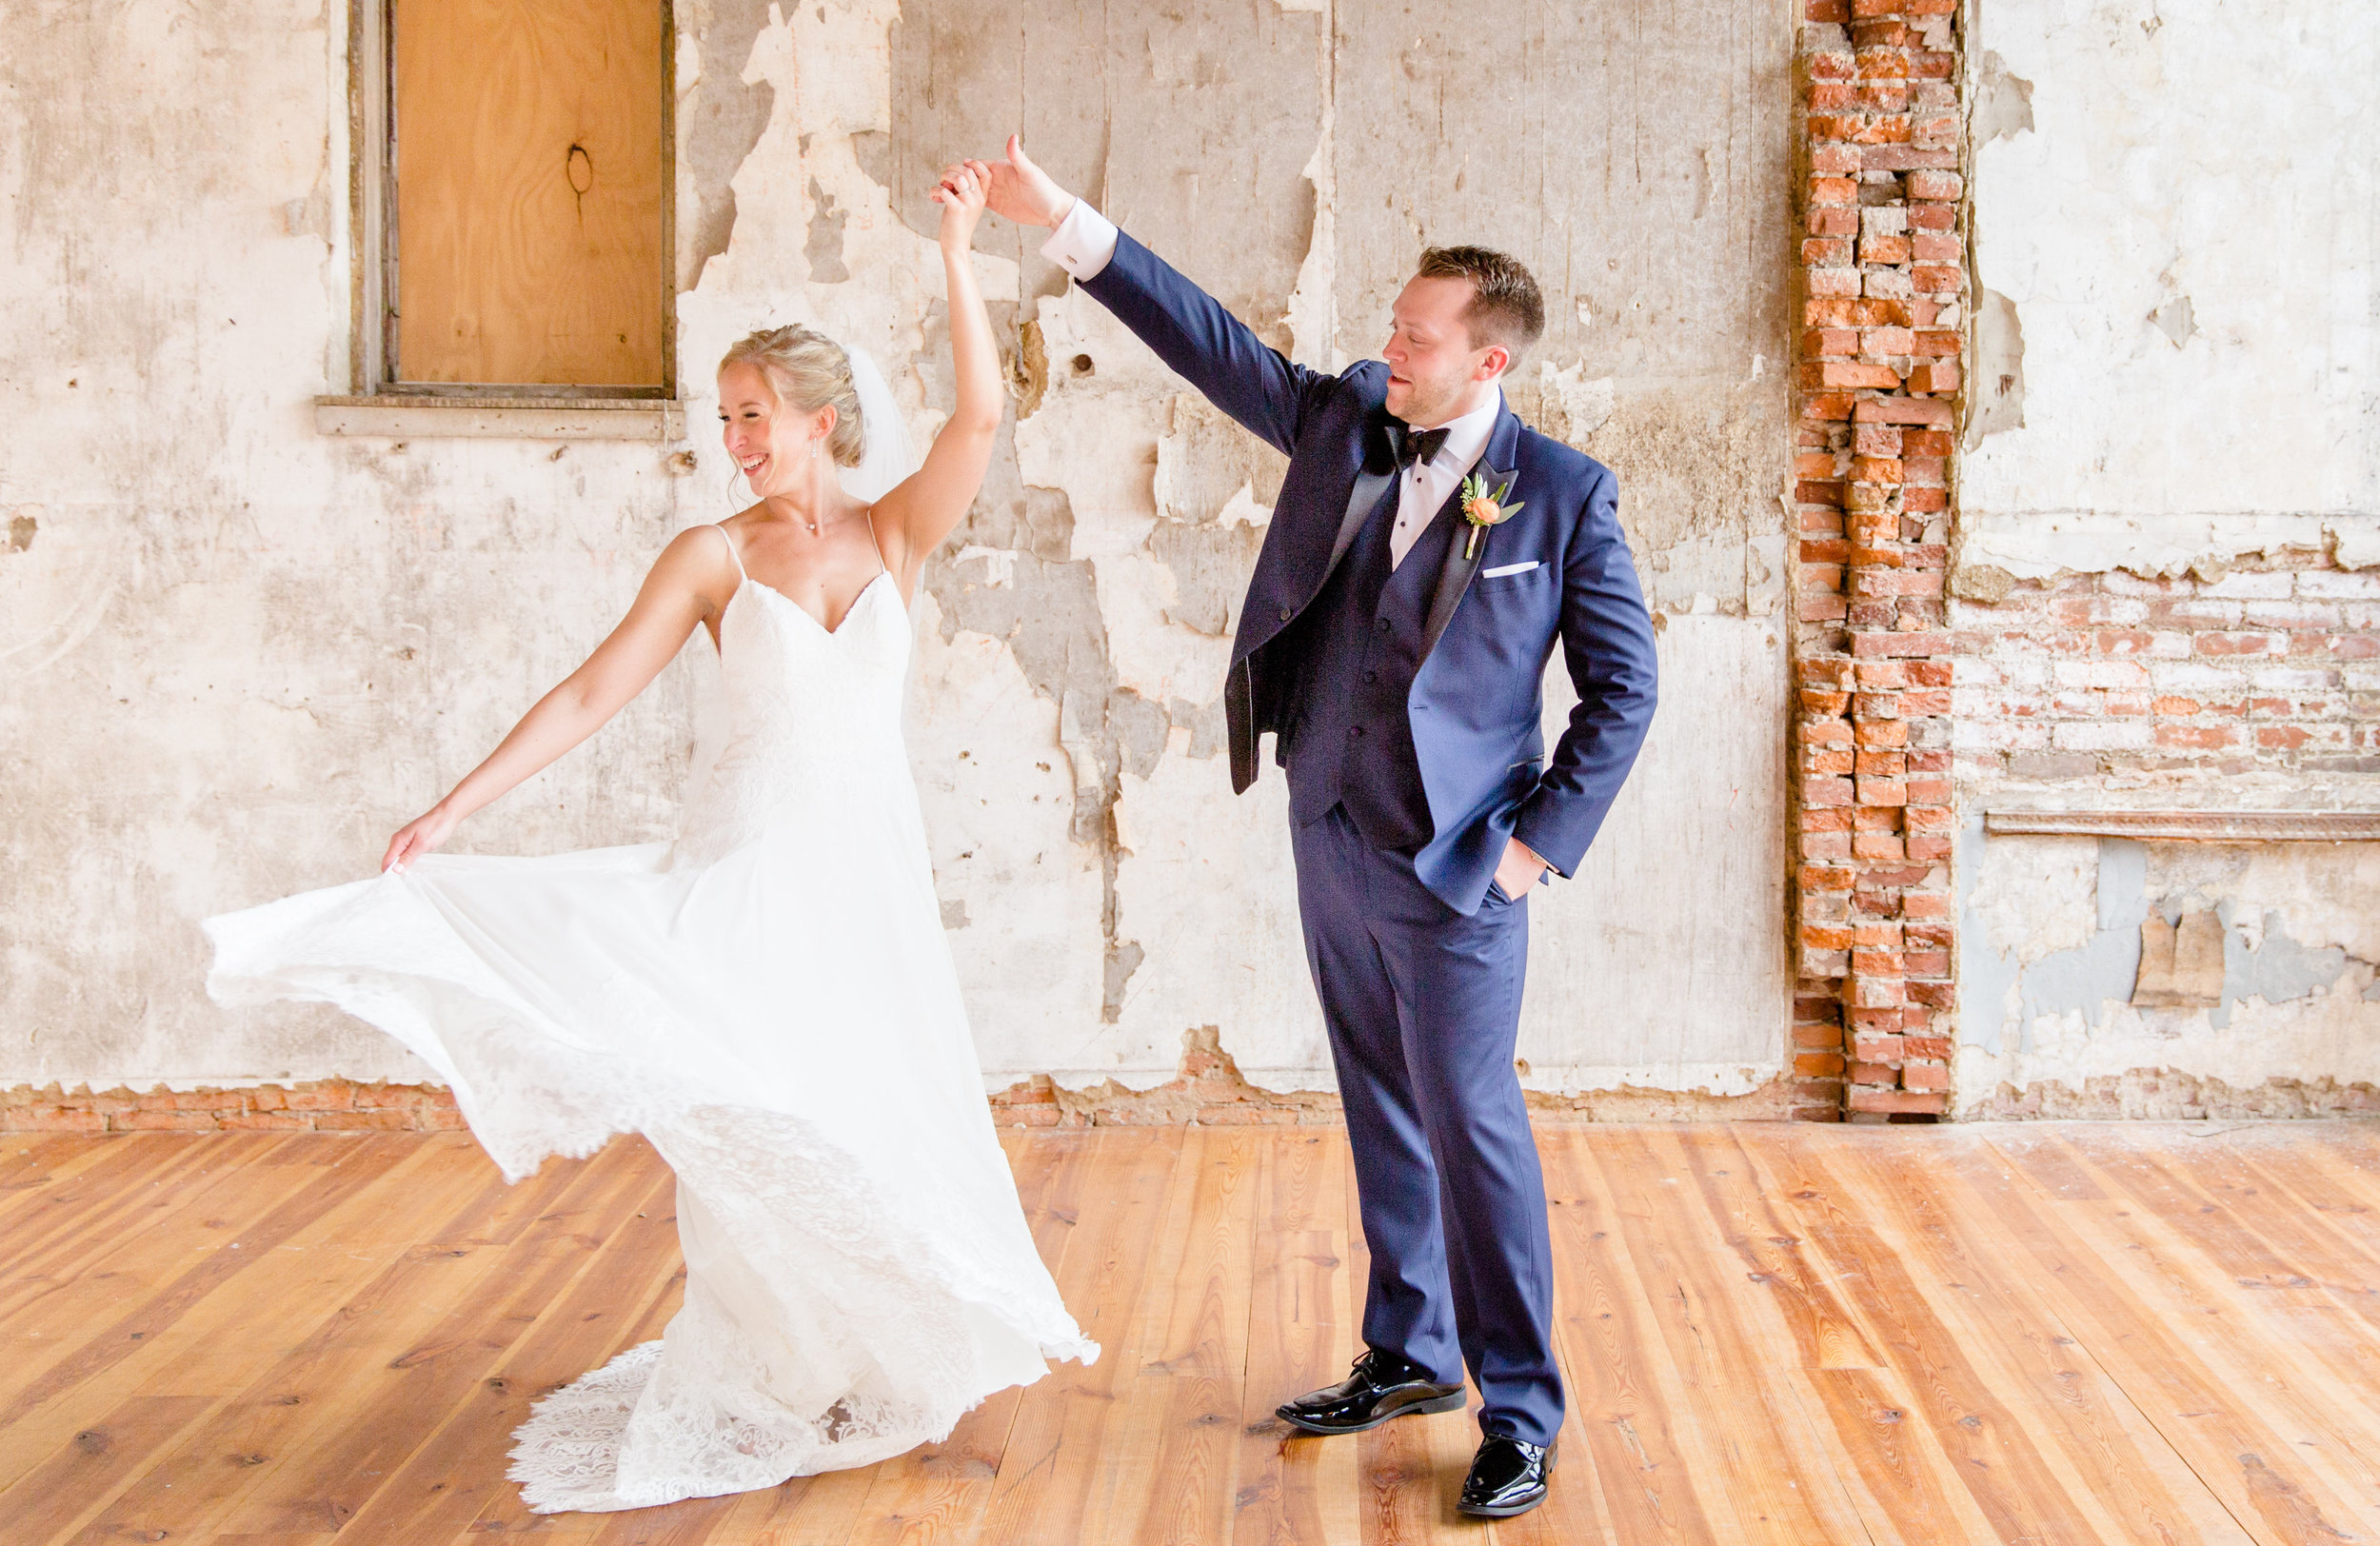 Bride and groom dancing in antique rustic space at Excelsior event venue